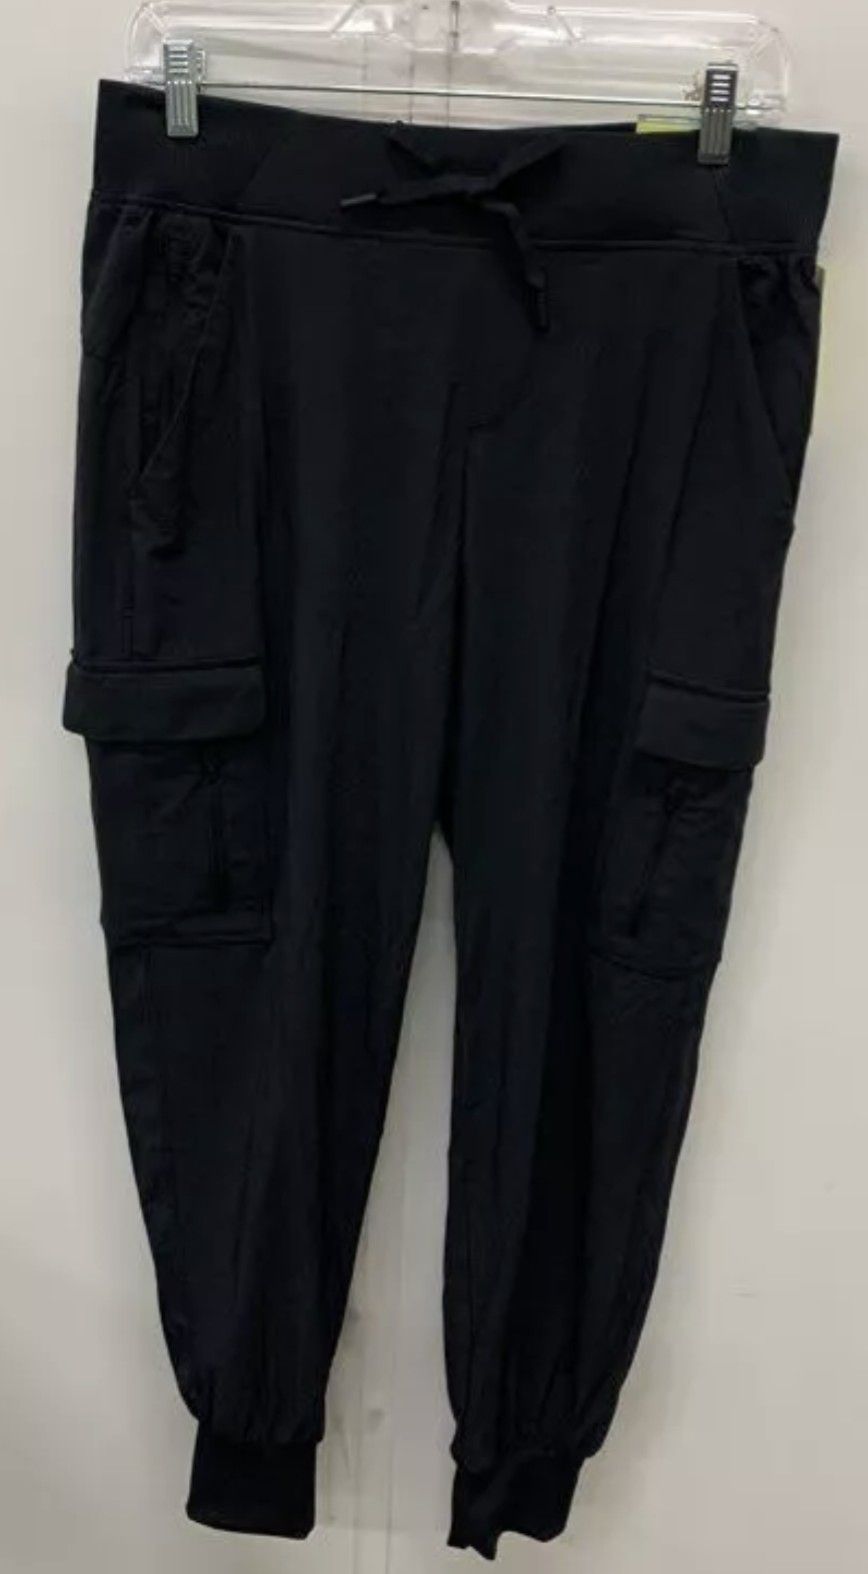 NWT All In Motion Women's Black Cargo Pants Joggers  Size M